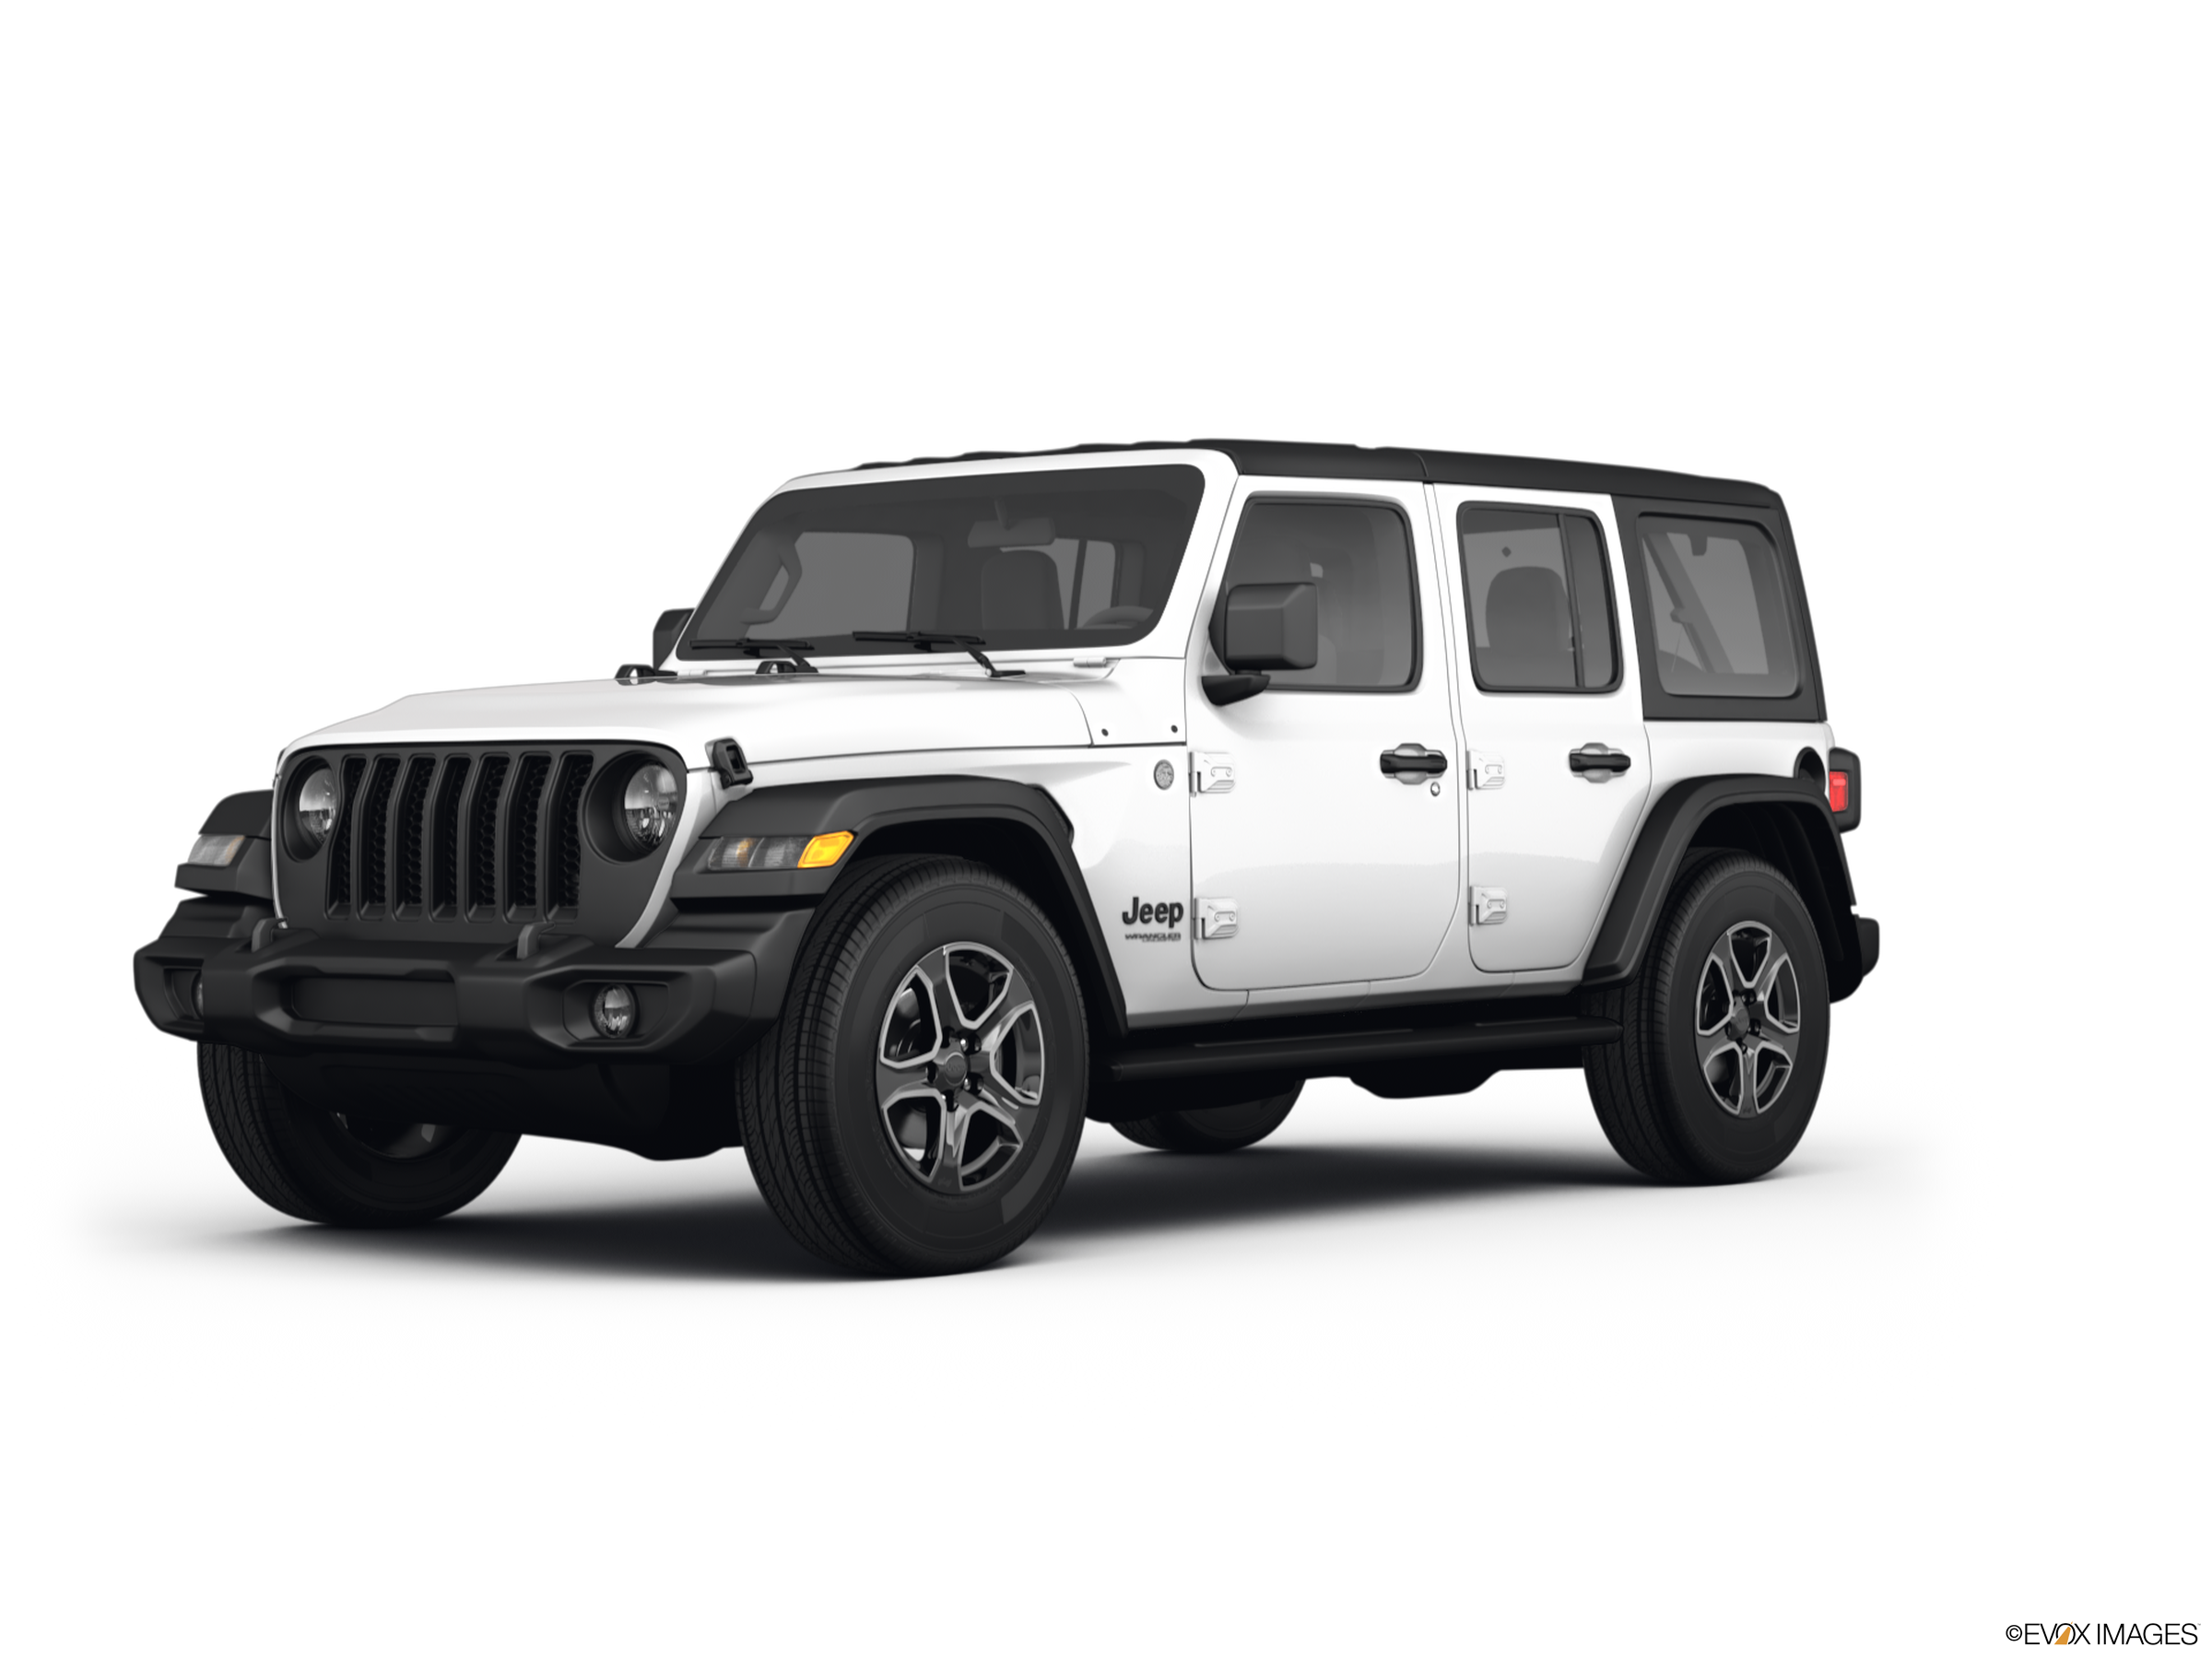 New 2022 Jeep Wrangler Unlimited Sahara Prices | Kelley Blue Book